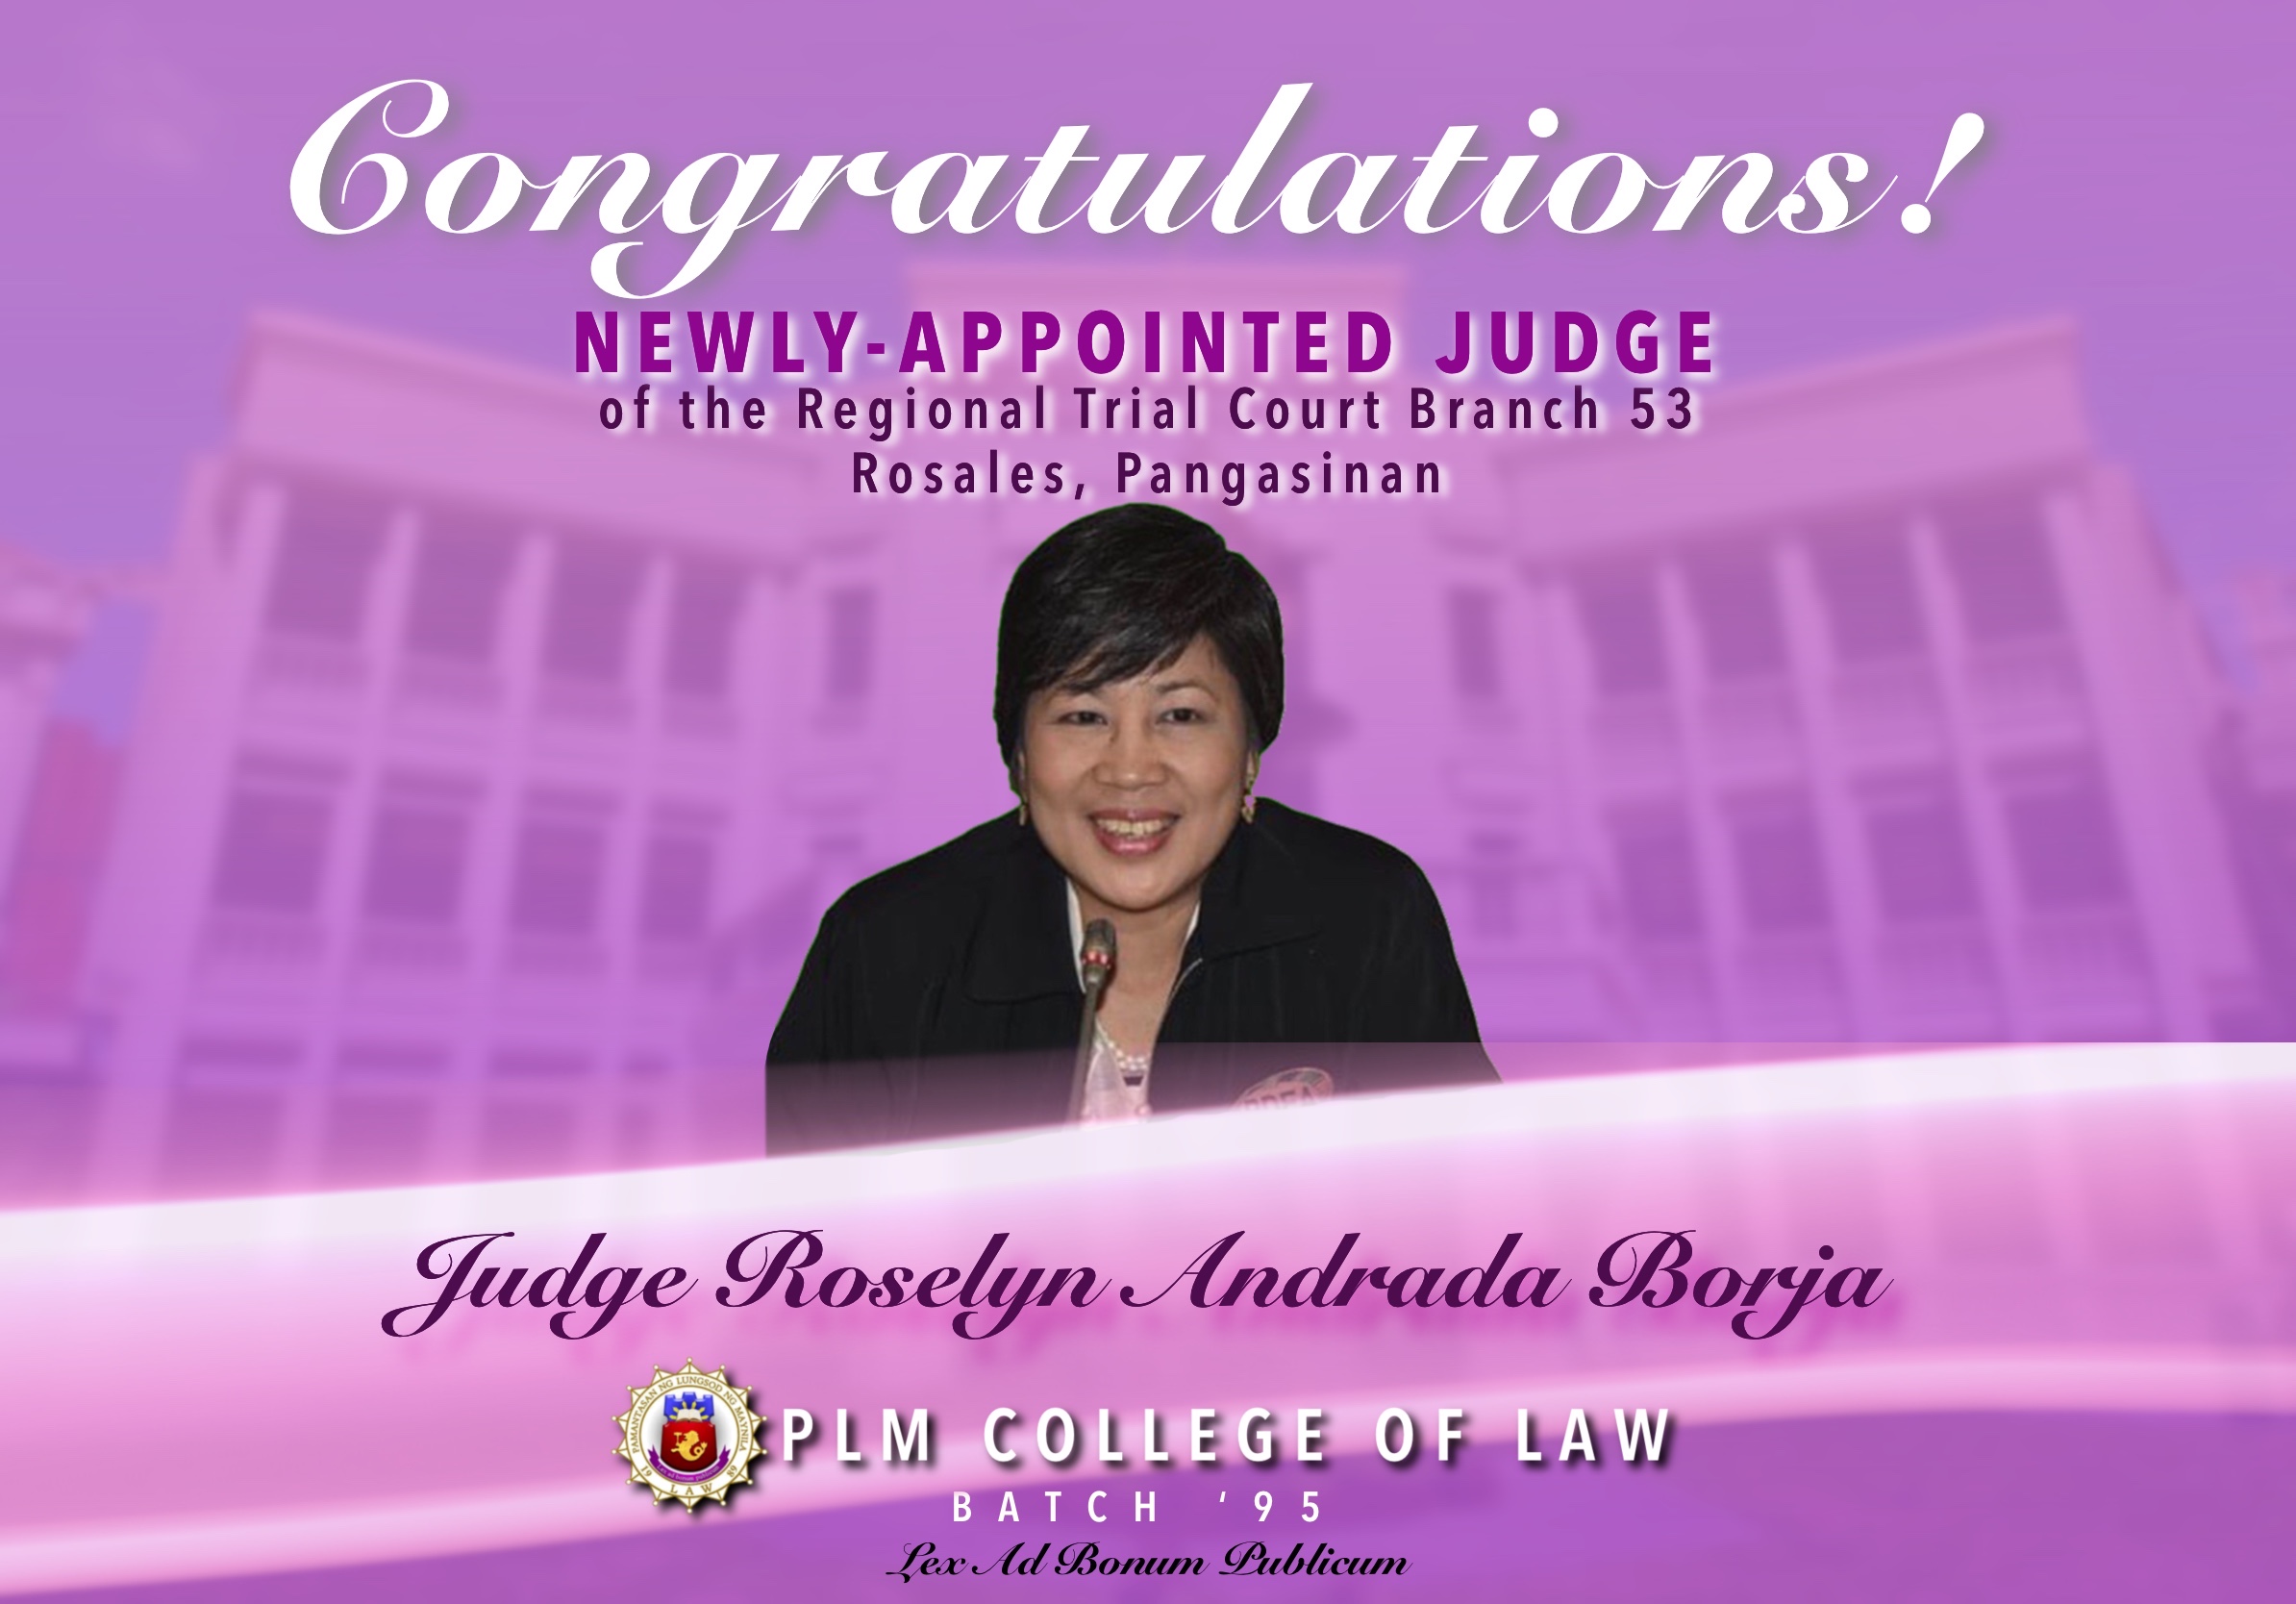 PLM College of Law Alumna judge appointment